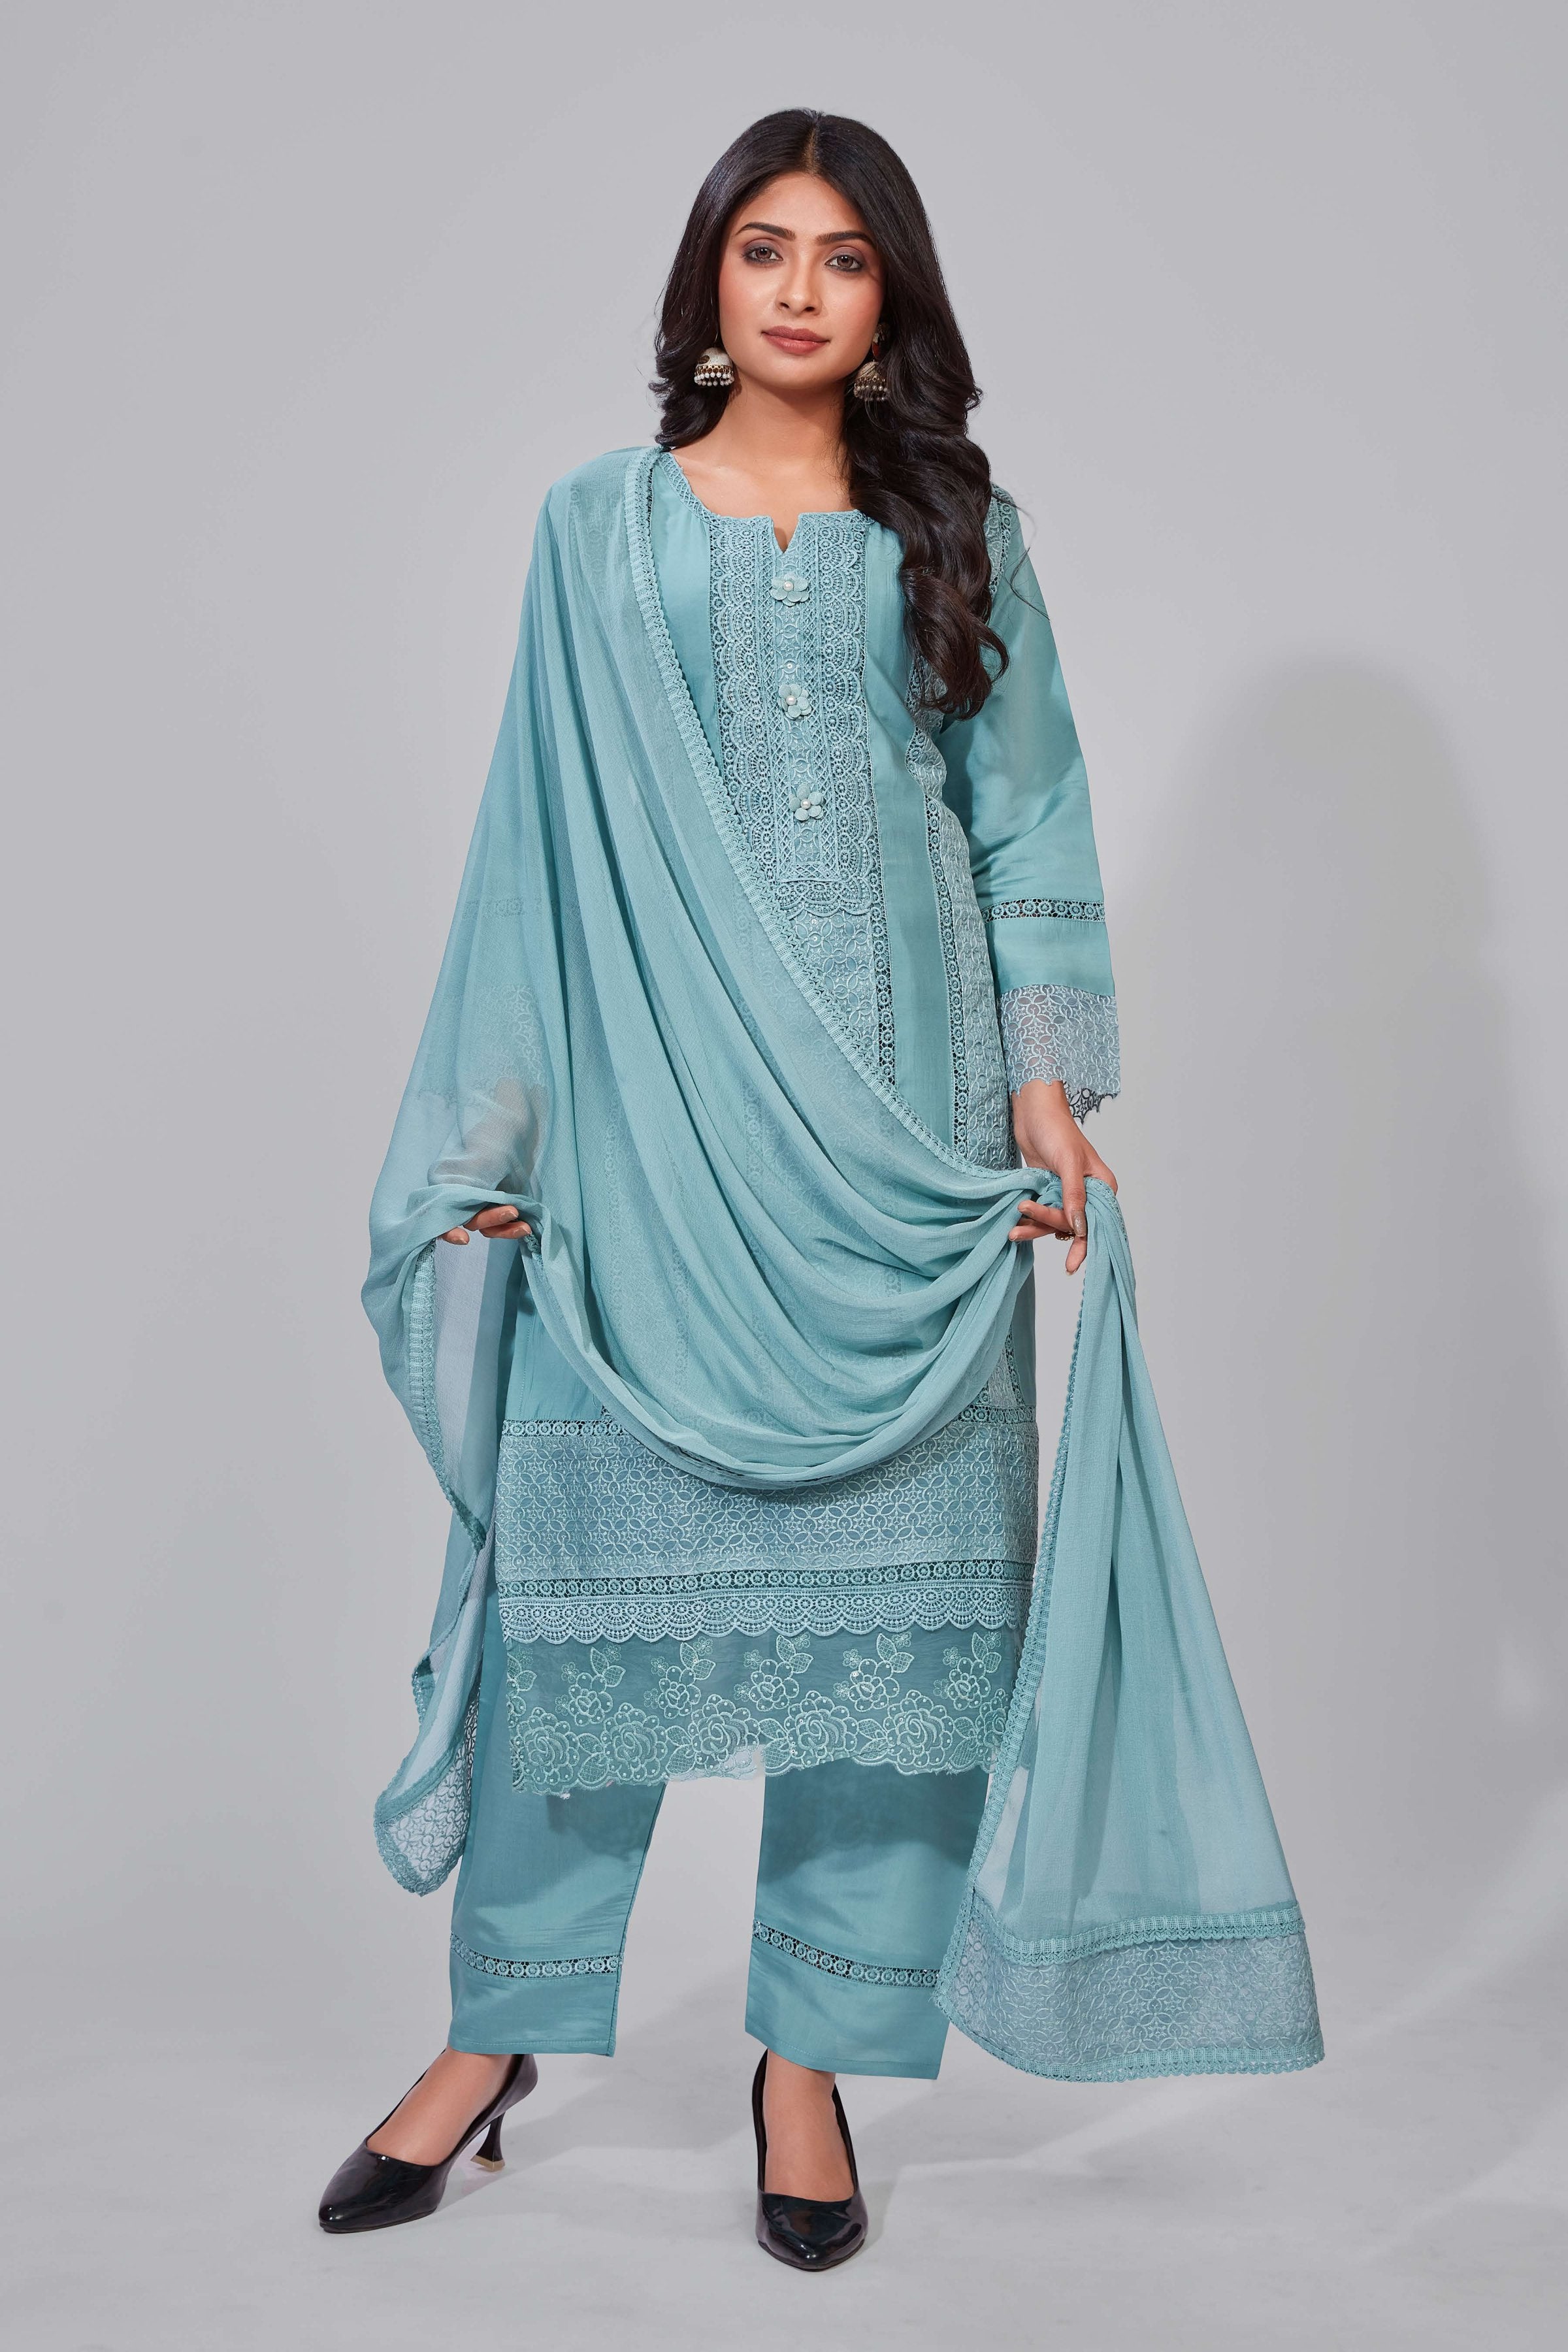 Varushi's featuring intricate Sifliwork and delicate lace Pakistanin Suit